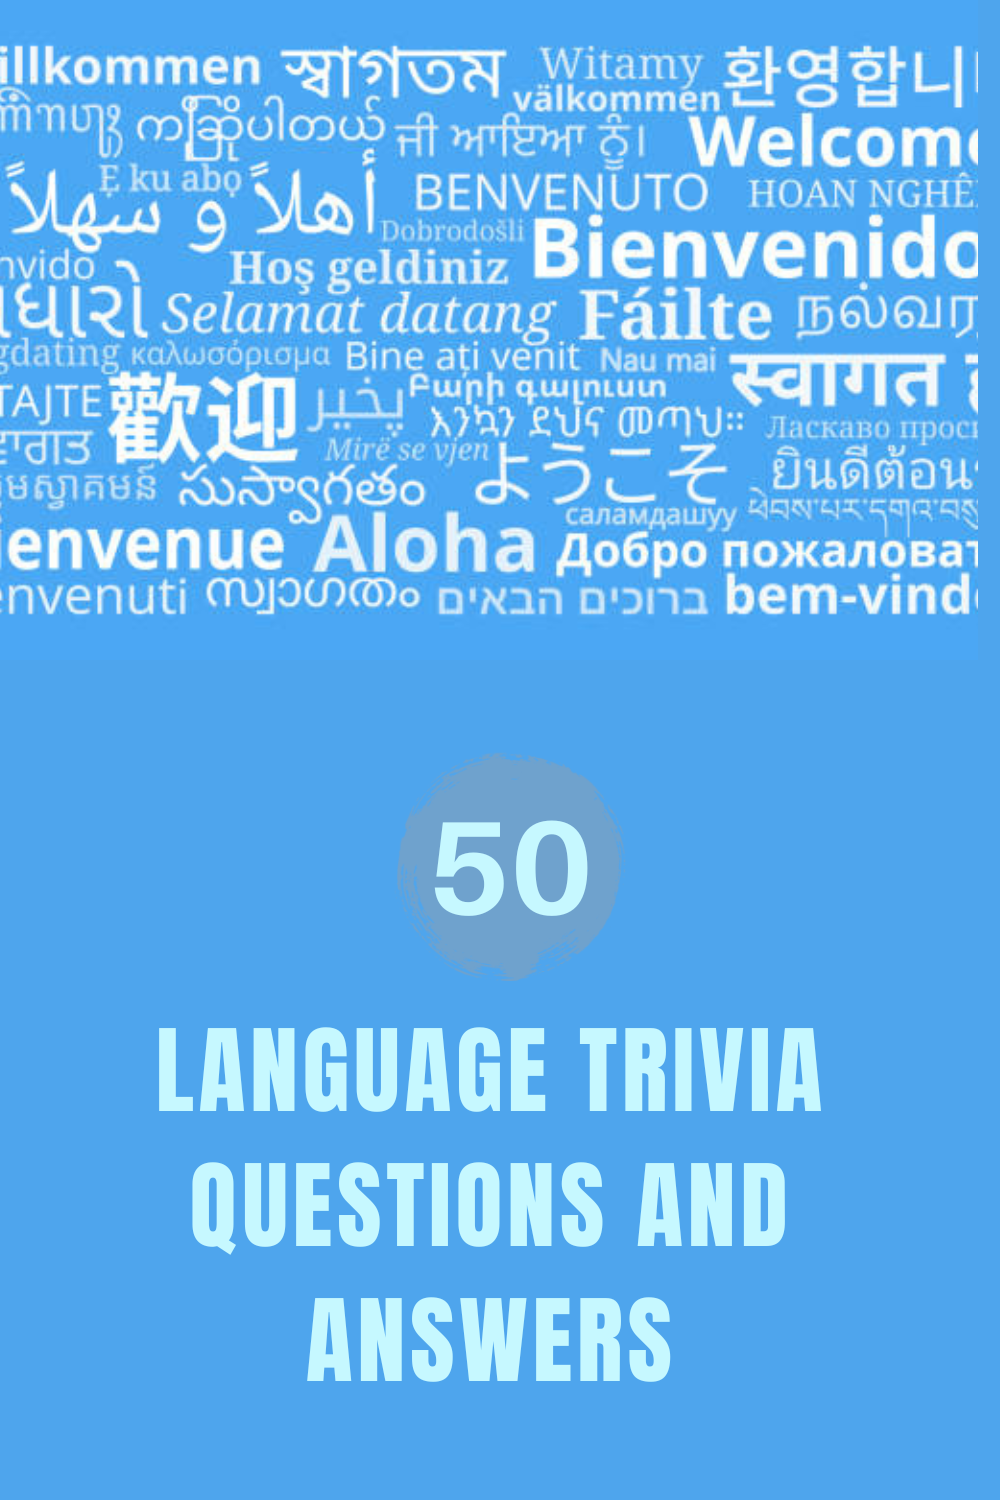 50 Language Trivia Questions and Answers